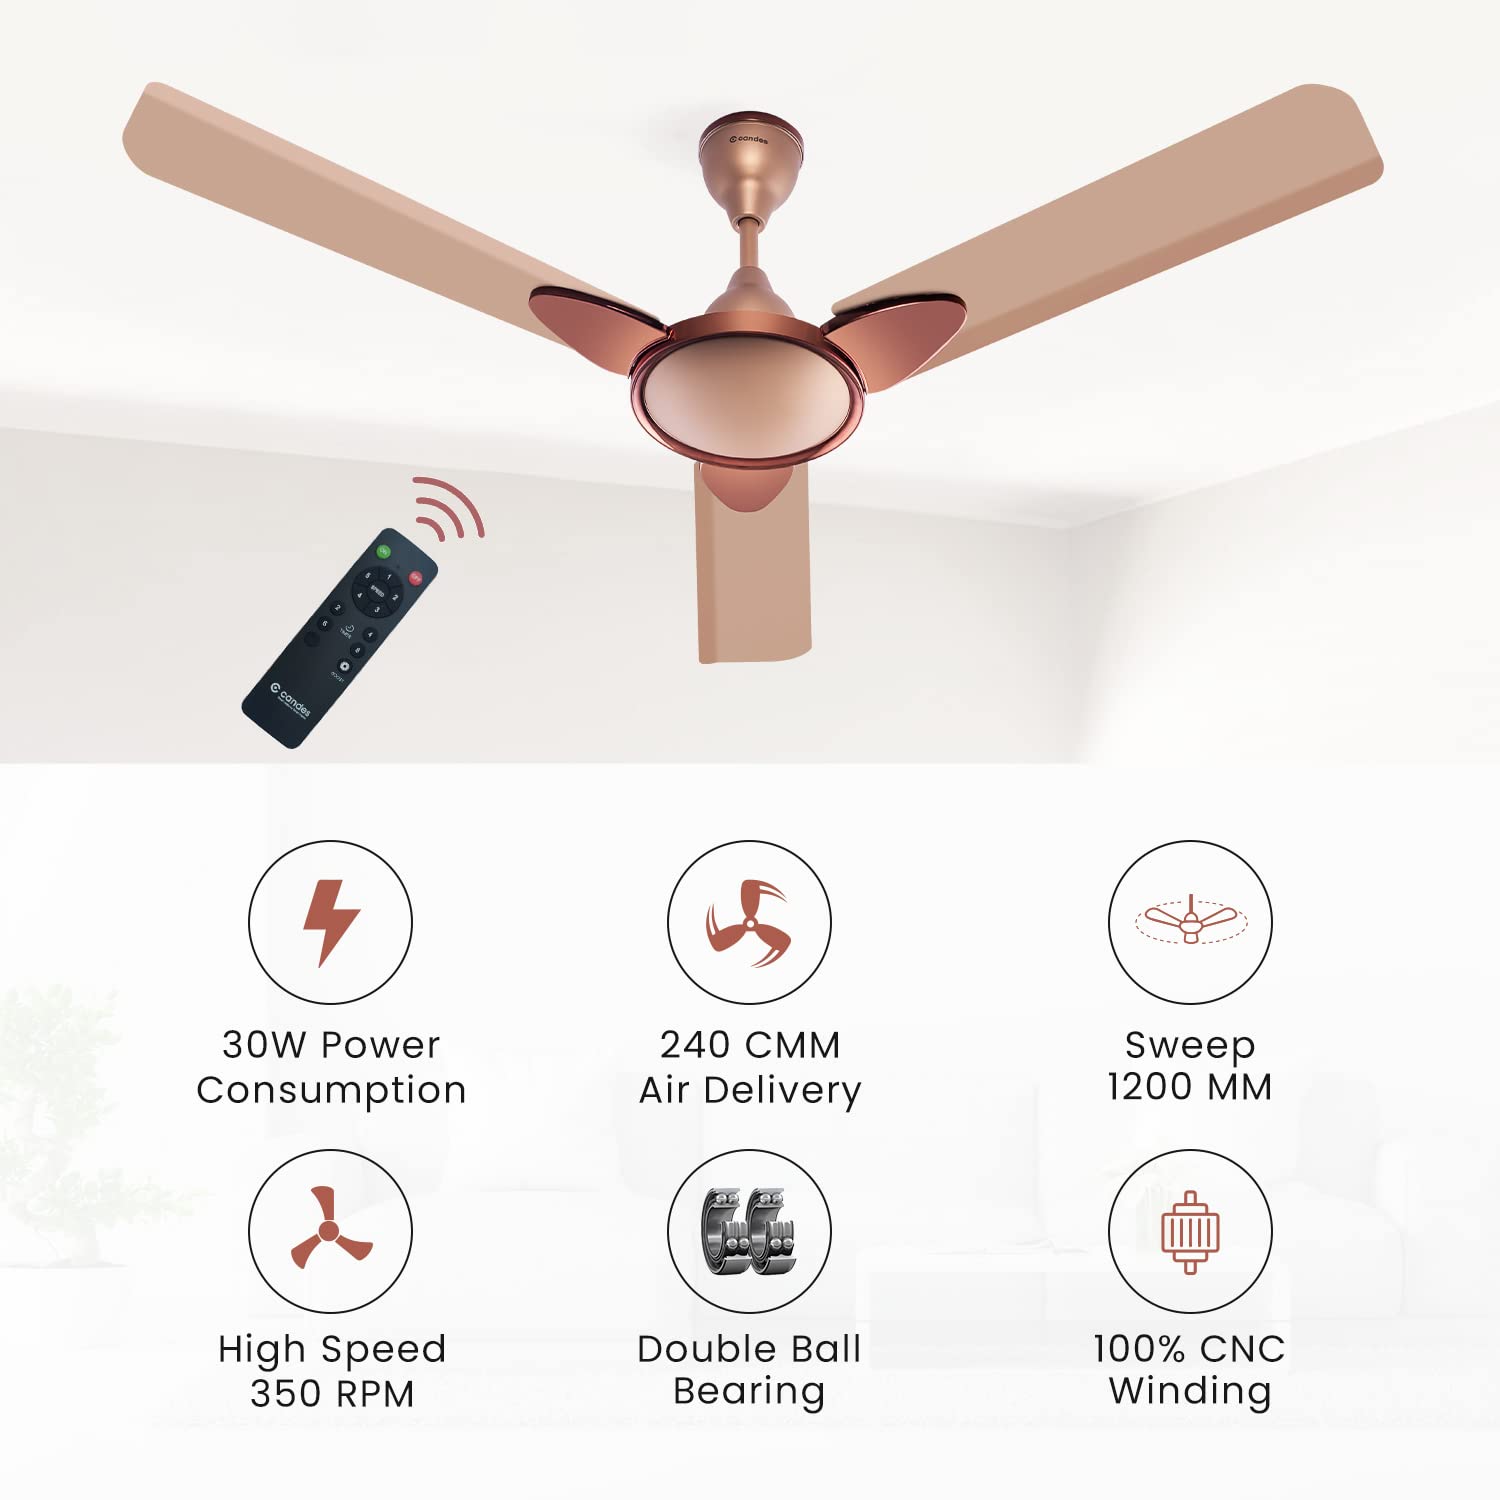 Candes Eco Zest Energy saving Designer 1200 mm / 48 inch Anti-Rust BLDC Ceiling Fan With Remote (2 Years Warranty) (Broken Gold)